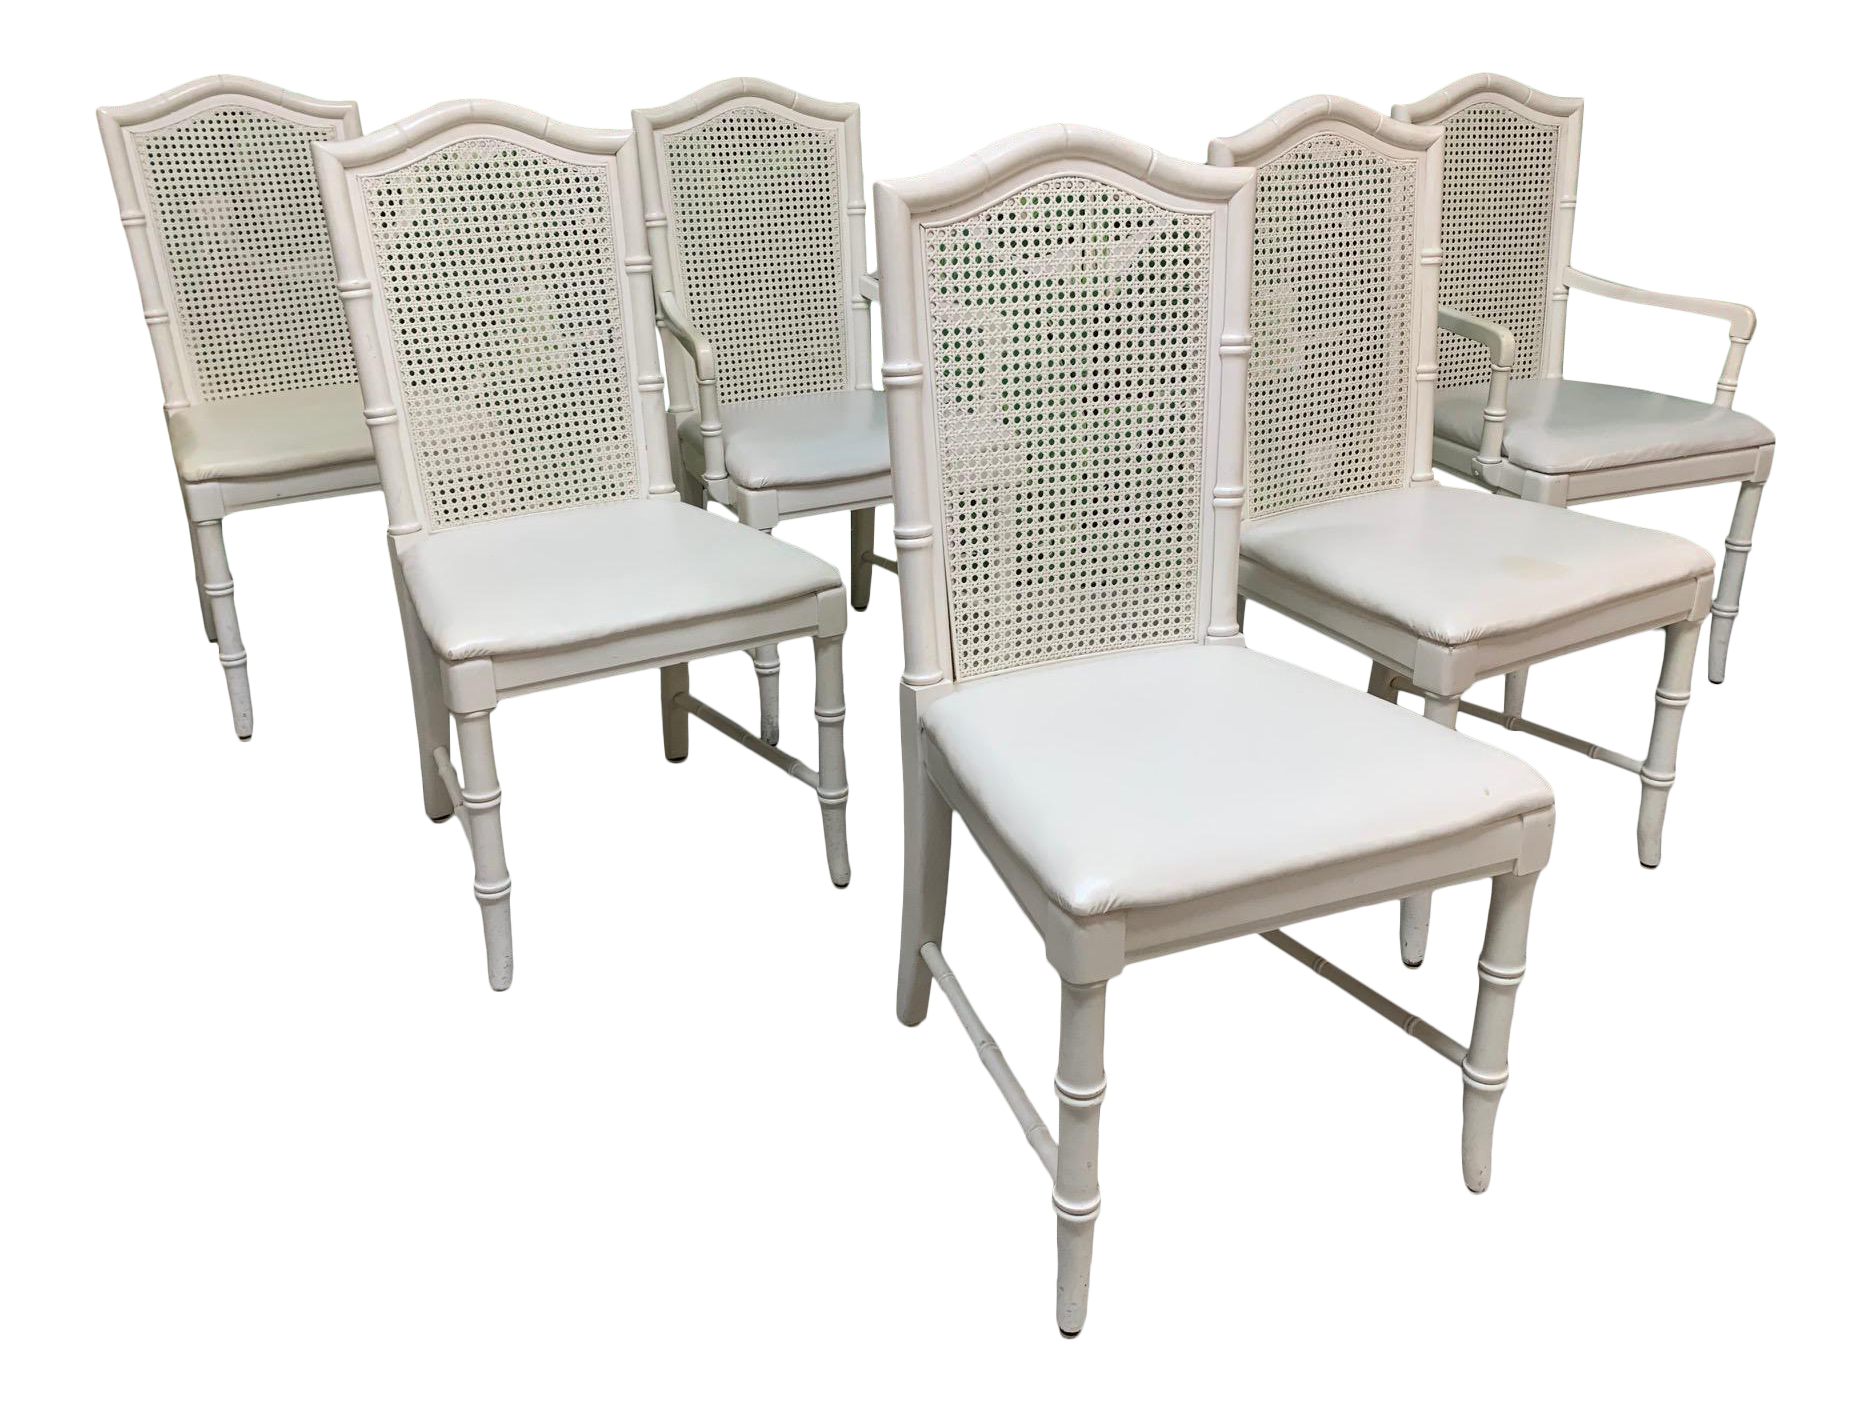 Faux Bamboo Cane Back Dining Chairs by Thomasville, Set of 6